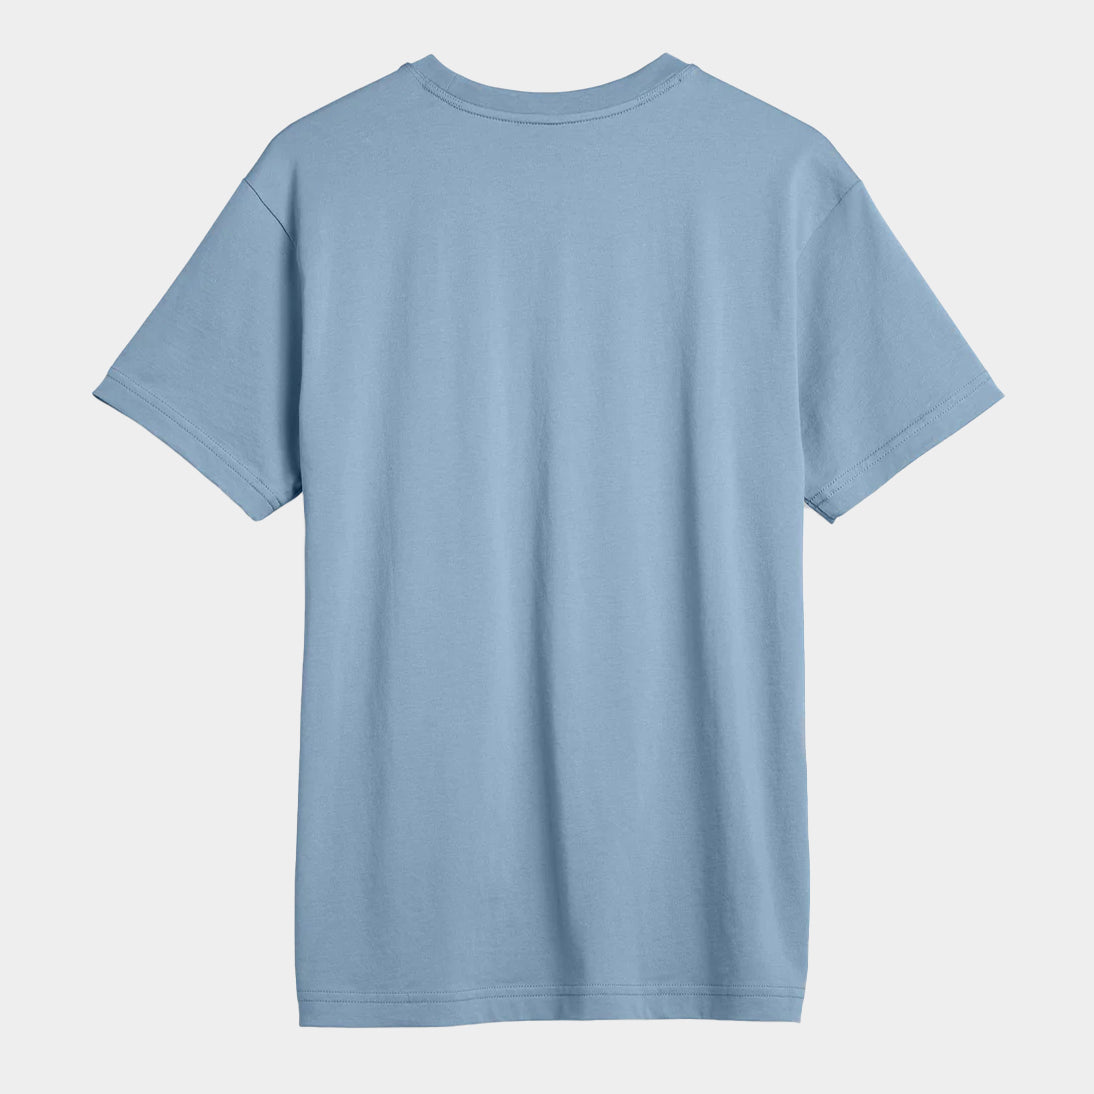 American Grown Supima 100% Cotton Tee in Baby Blue